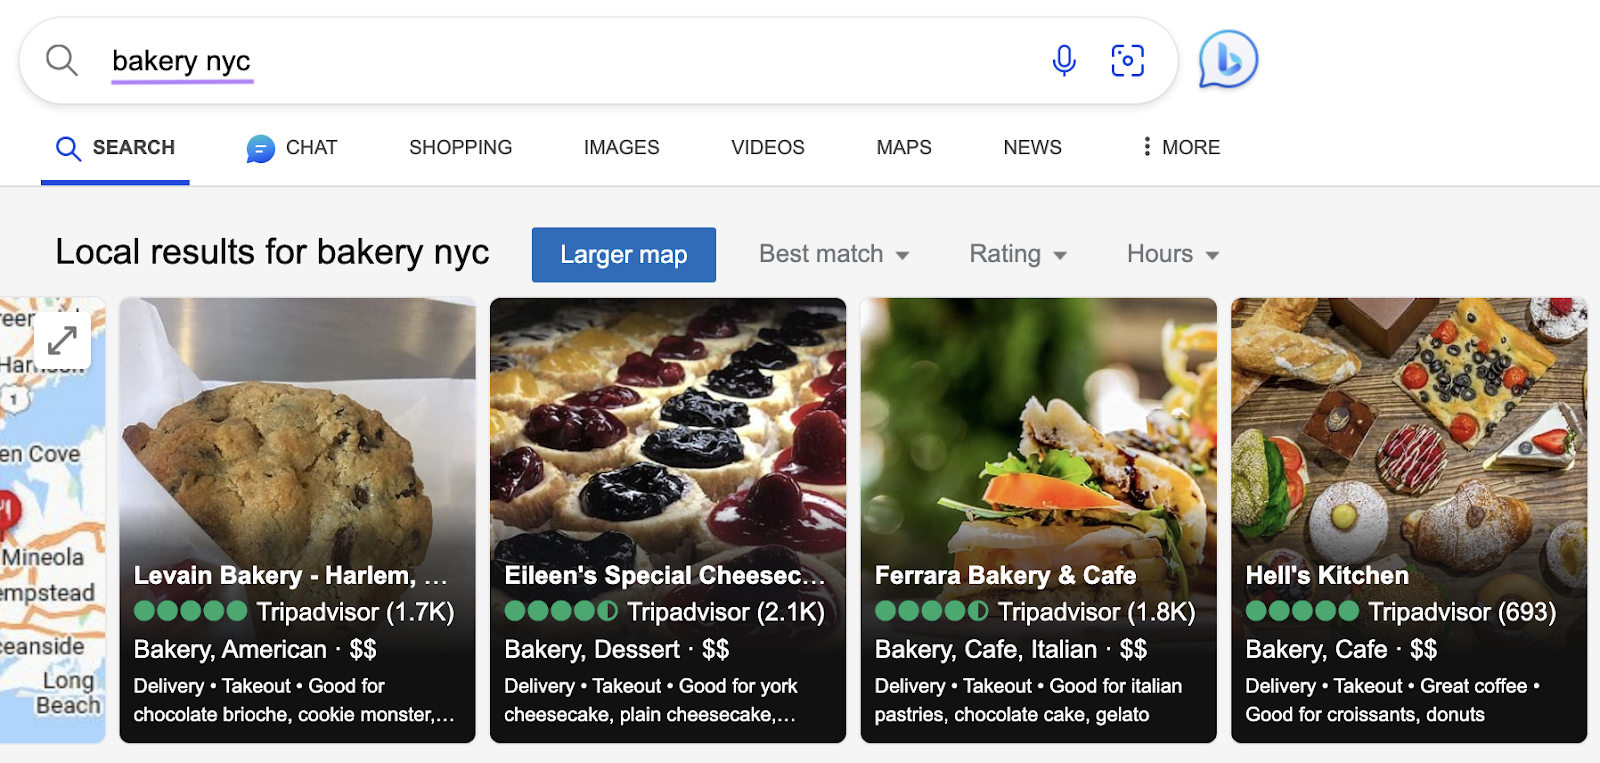 Bing results for "bakery nyc" display a lot of nice images of cake, pastries etc.